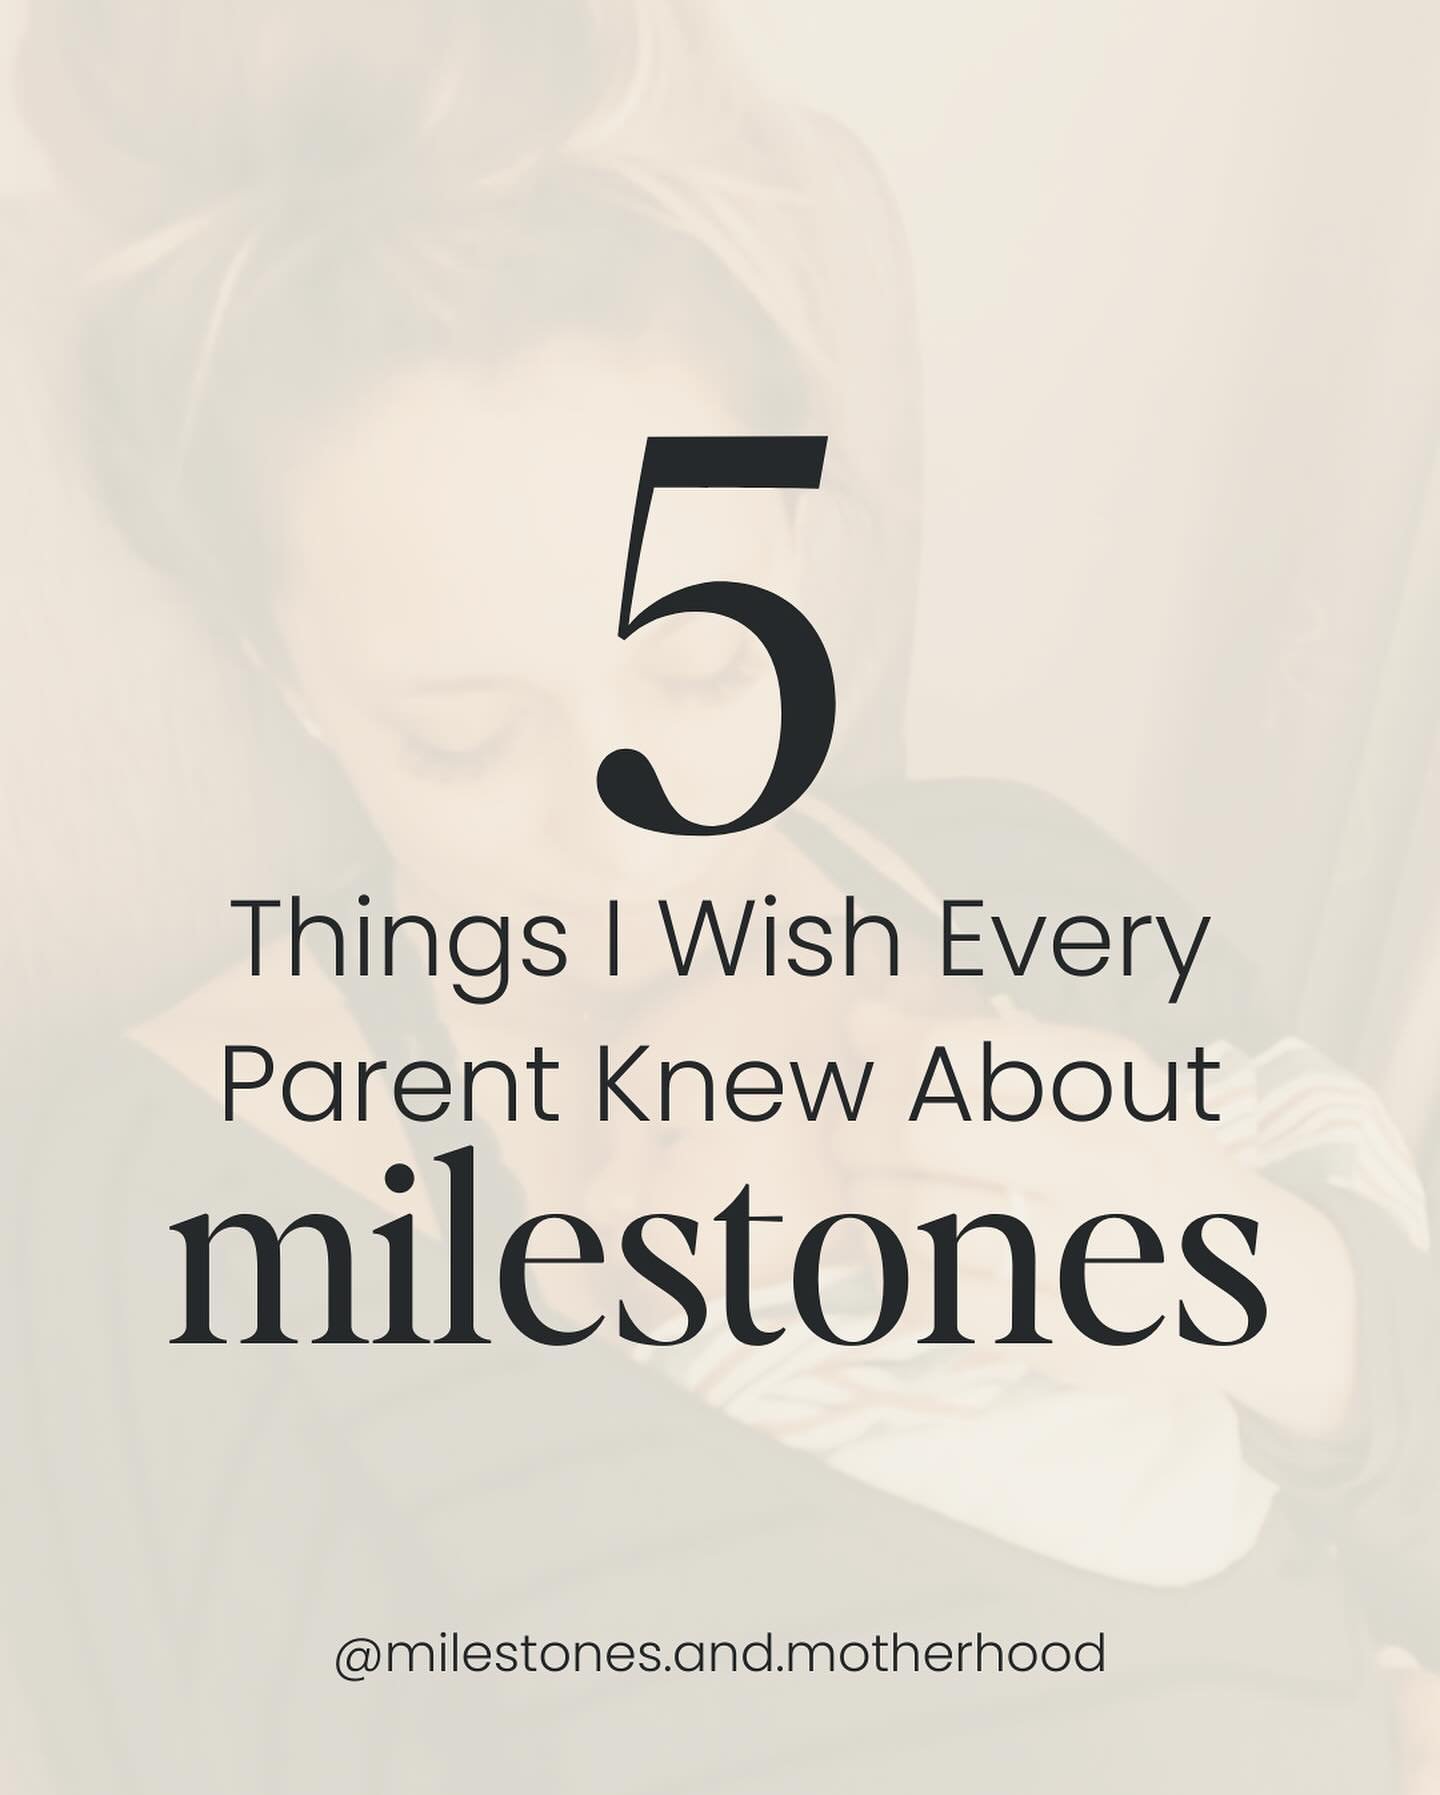 5 Things I Wish Every Parent Knew About MILESTONES&hellip;.

✨  I wish I could tell every parent these 5 things about milestones, as a pediatric physical therapist and mom myself.

I see it everyday.

I live it as a parent.

It can be SO hard not to 